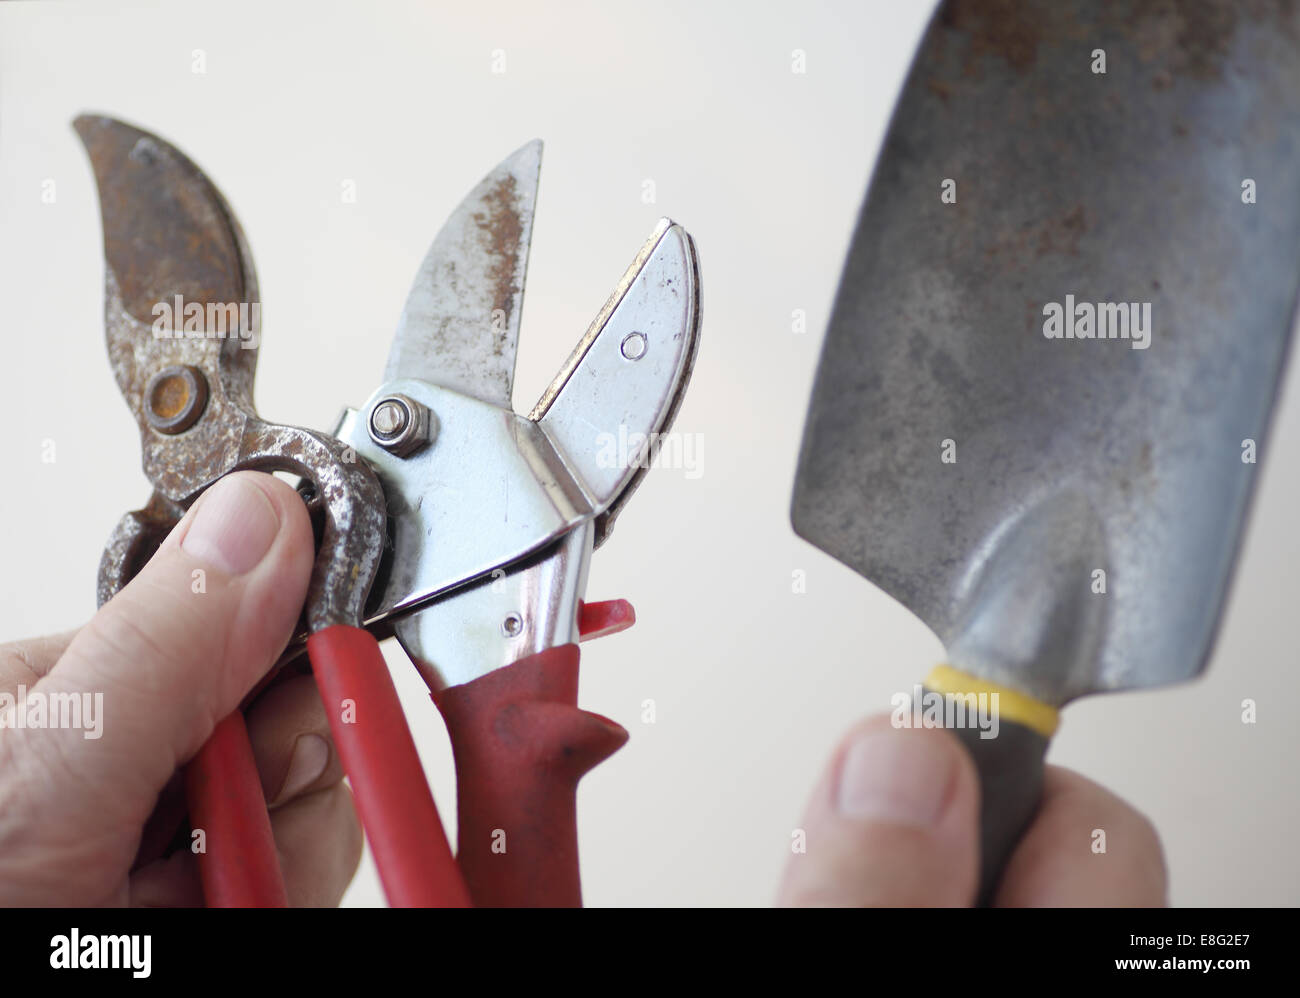 A man holding well-used plant clippers and a trowel Stock Photo